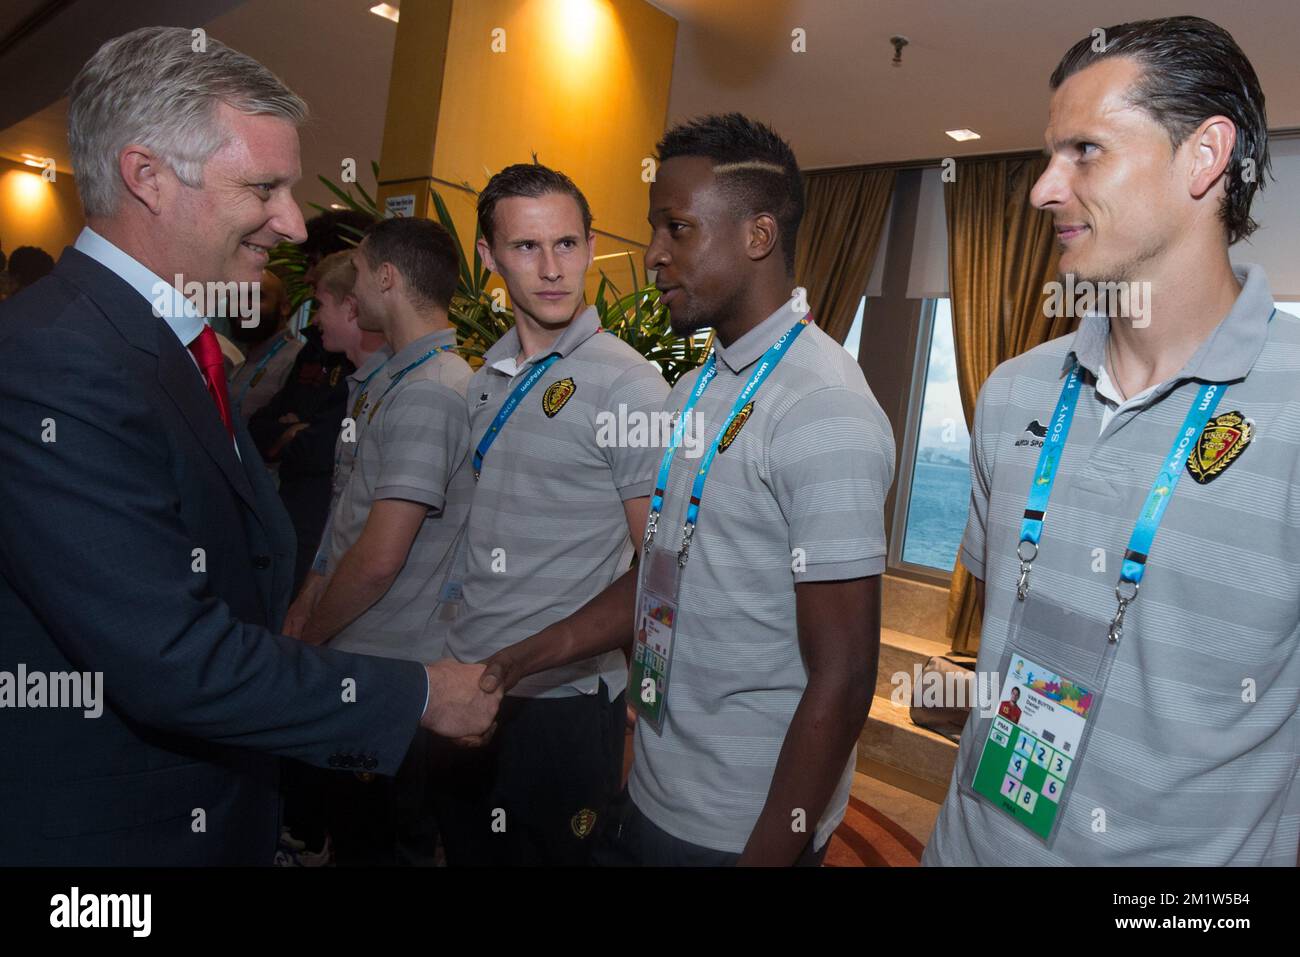 King Philippe - Filip of Belgium shakes hands with and Belgium's Divock Origi next to Belgium's Daniel Van Buyten as Royal couple meet Belgian team Red Devils won their second game over Russia to qualify for 1/8 finals, in Rio de Janeiro, Brazil, at the 2014 FIFA World Cup, Sunday 22 June 2014. Stock Photo